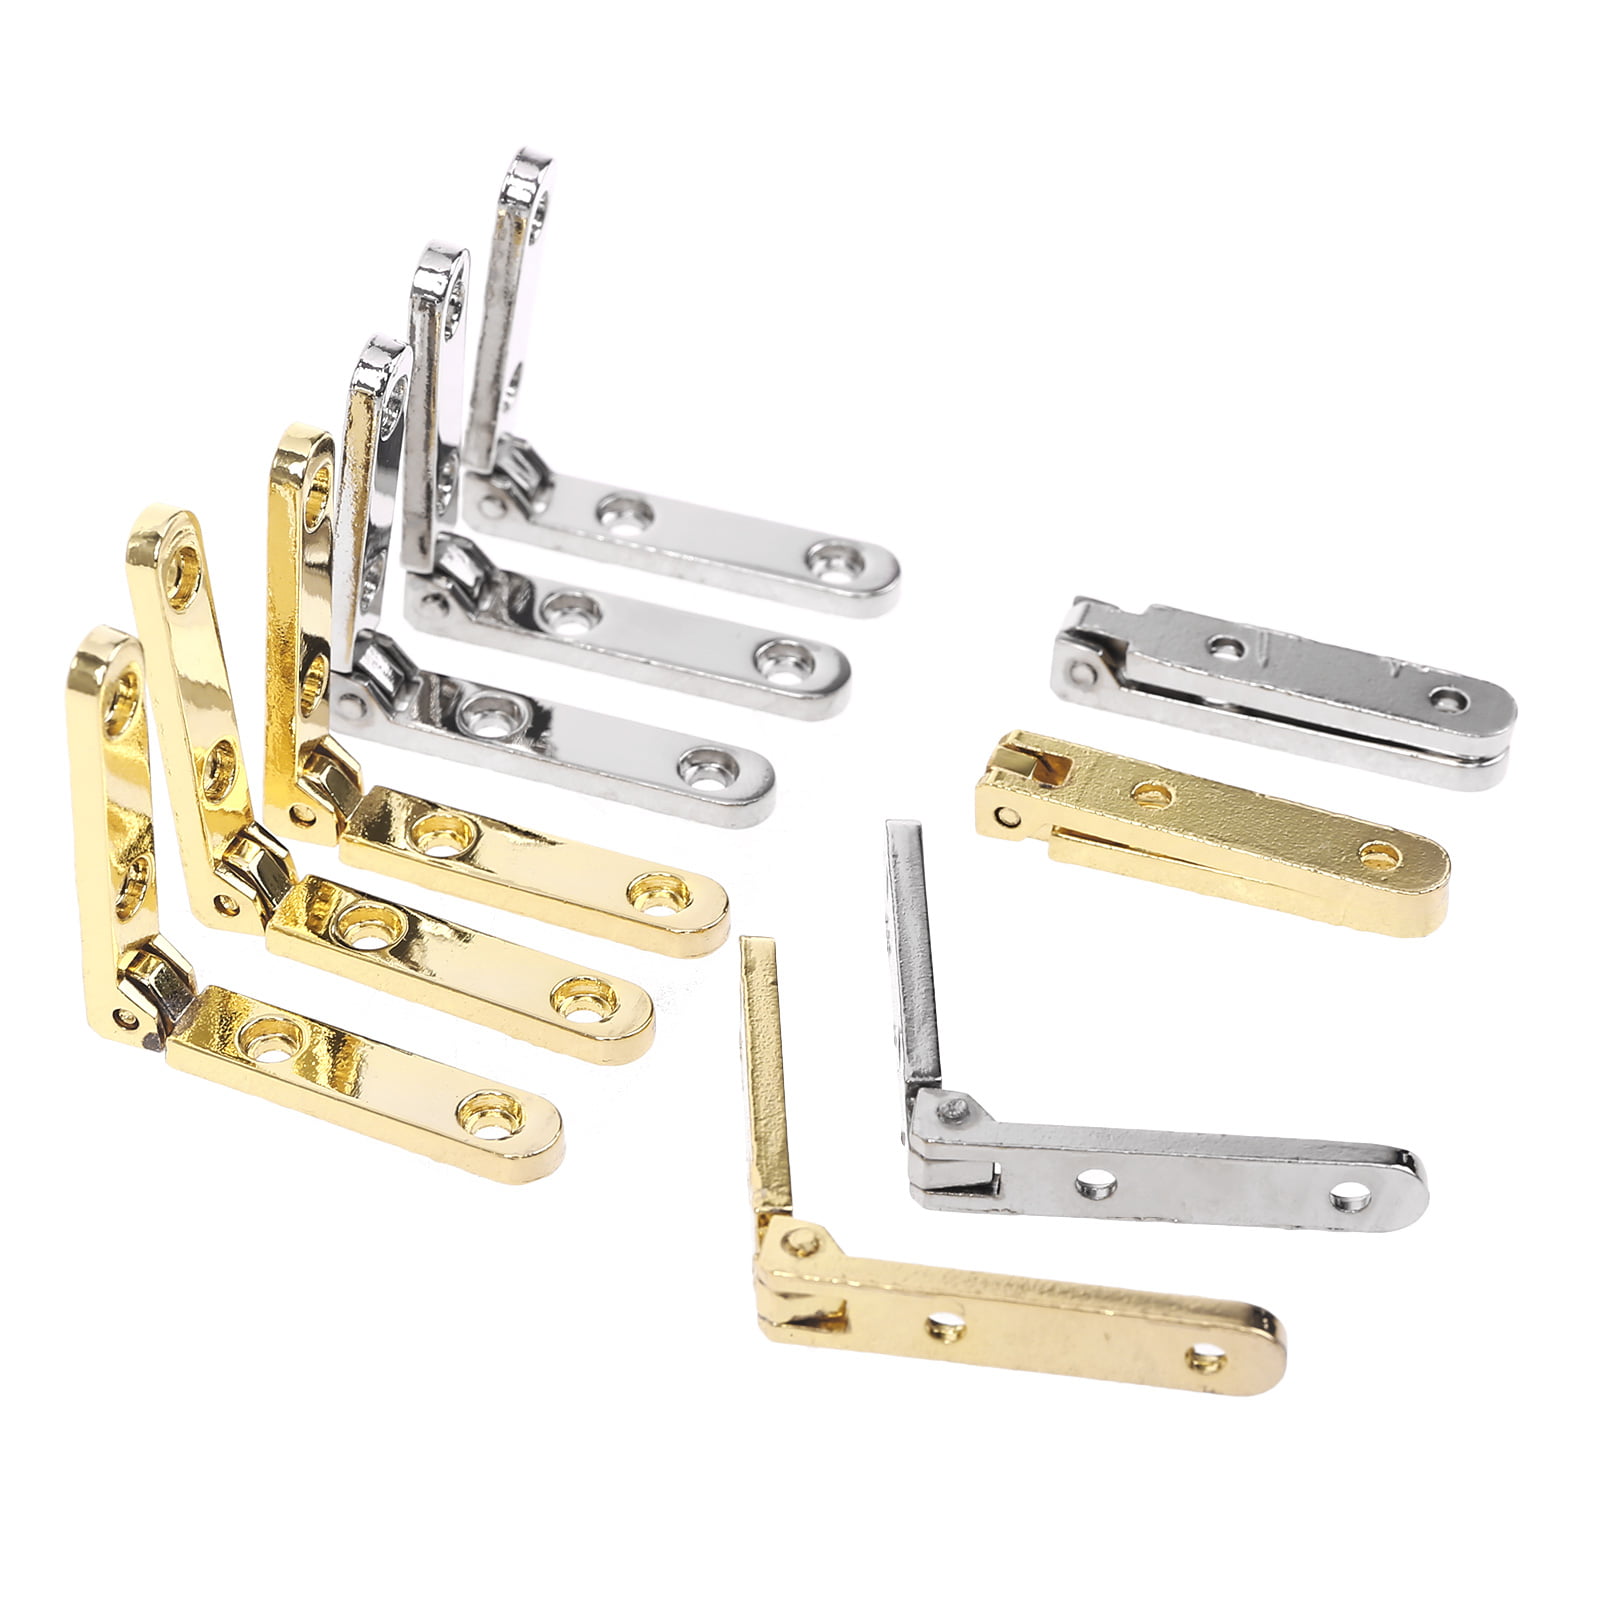 10Pcs/Bag 90 Degree Hinges Zinc Alloy Spring Hinge for Wooden Box Jewellery Case